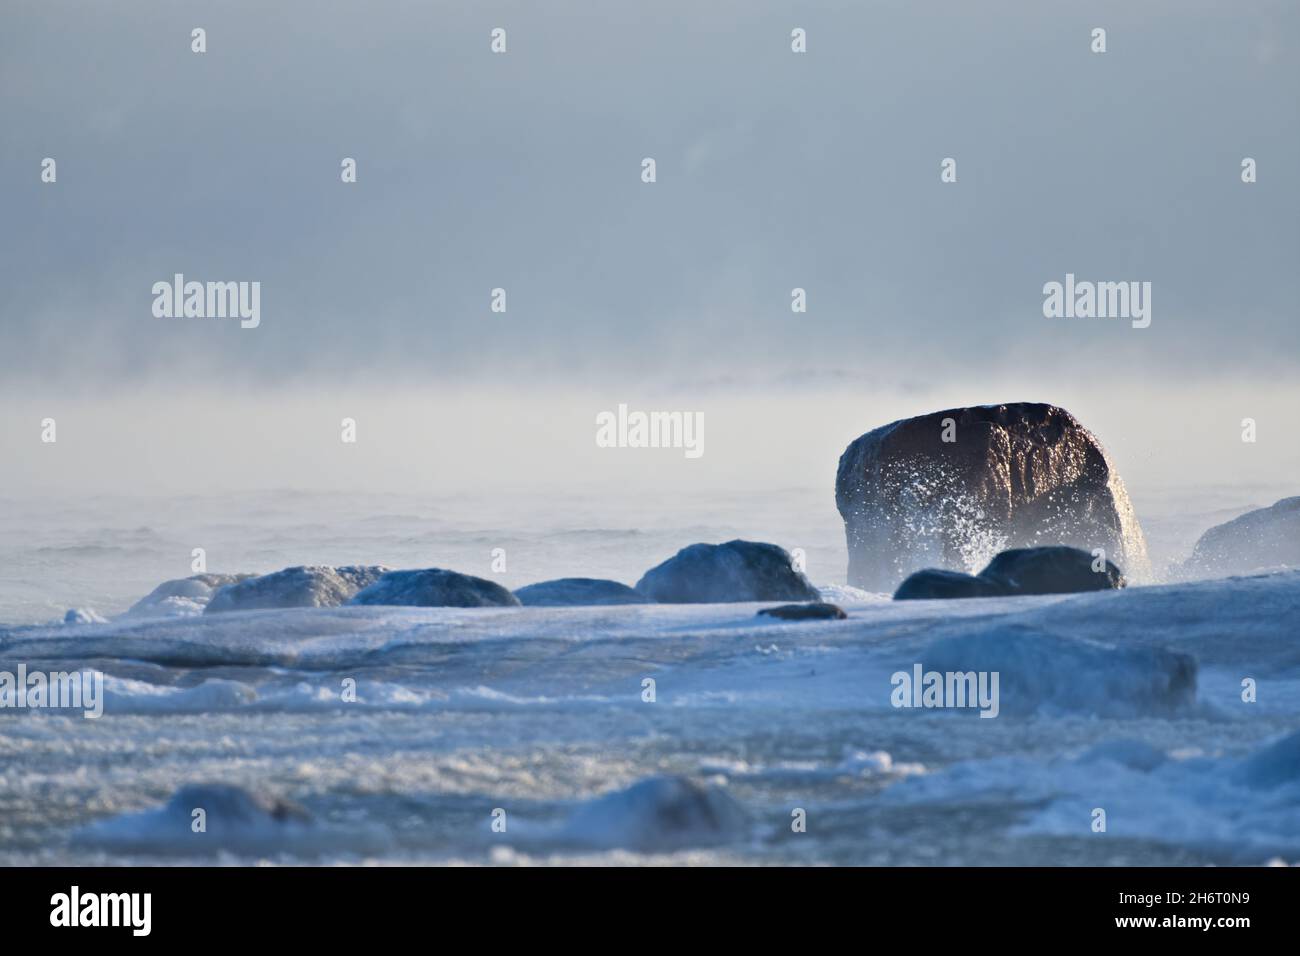 Ice covered rock by the Baltic Sea that about to freeze over with water splashing against the rocks in Helsinki, Finland on 14 January 2021. Stock Photo